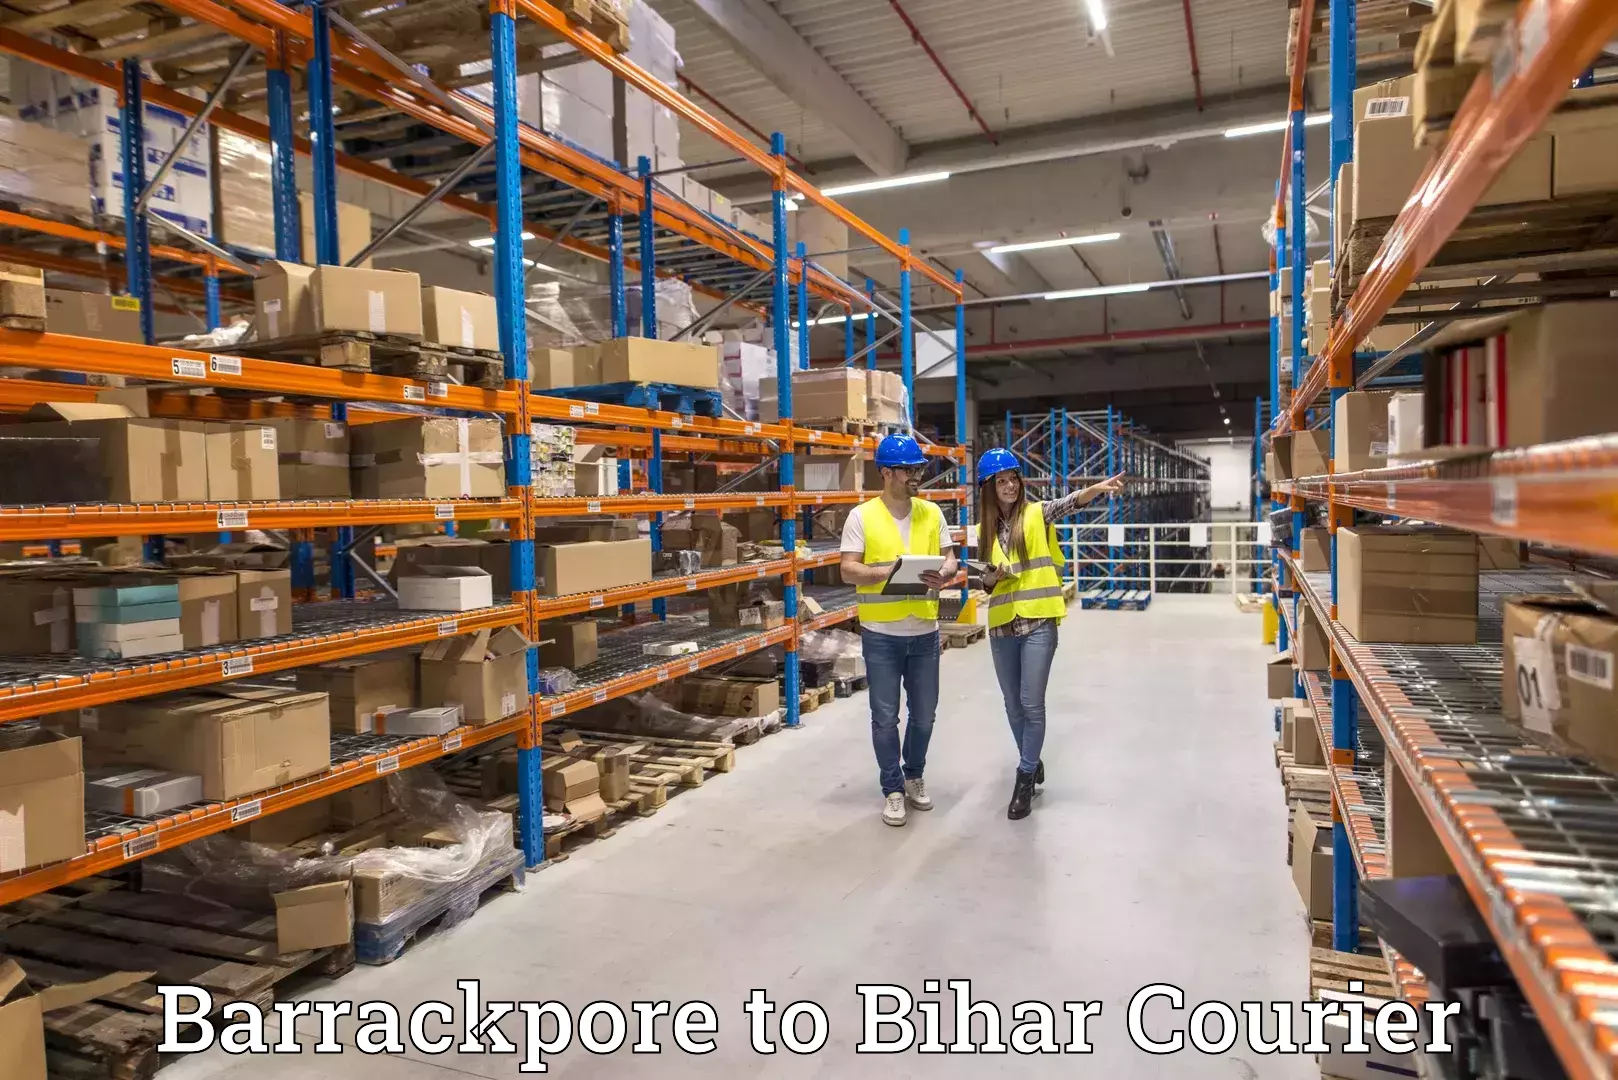 International courier networks Barrackpore to Birpur